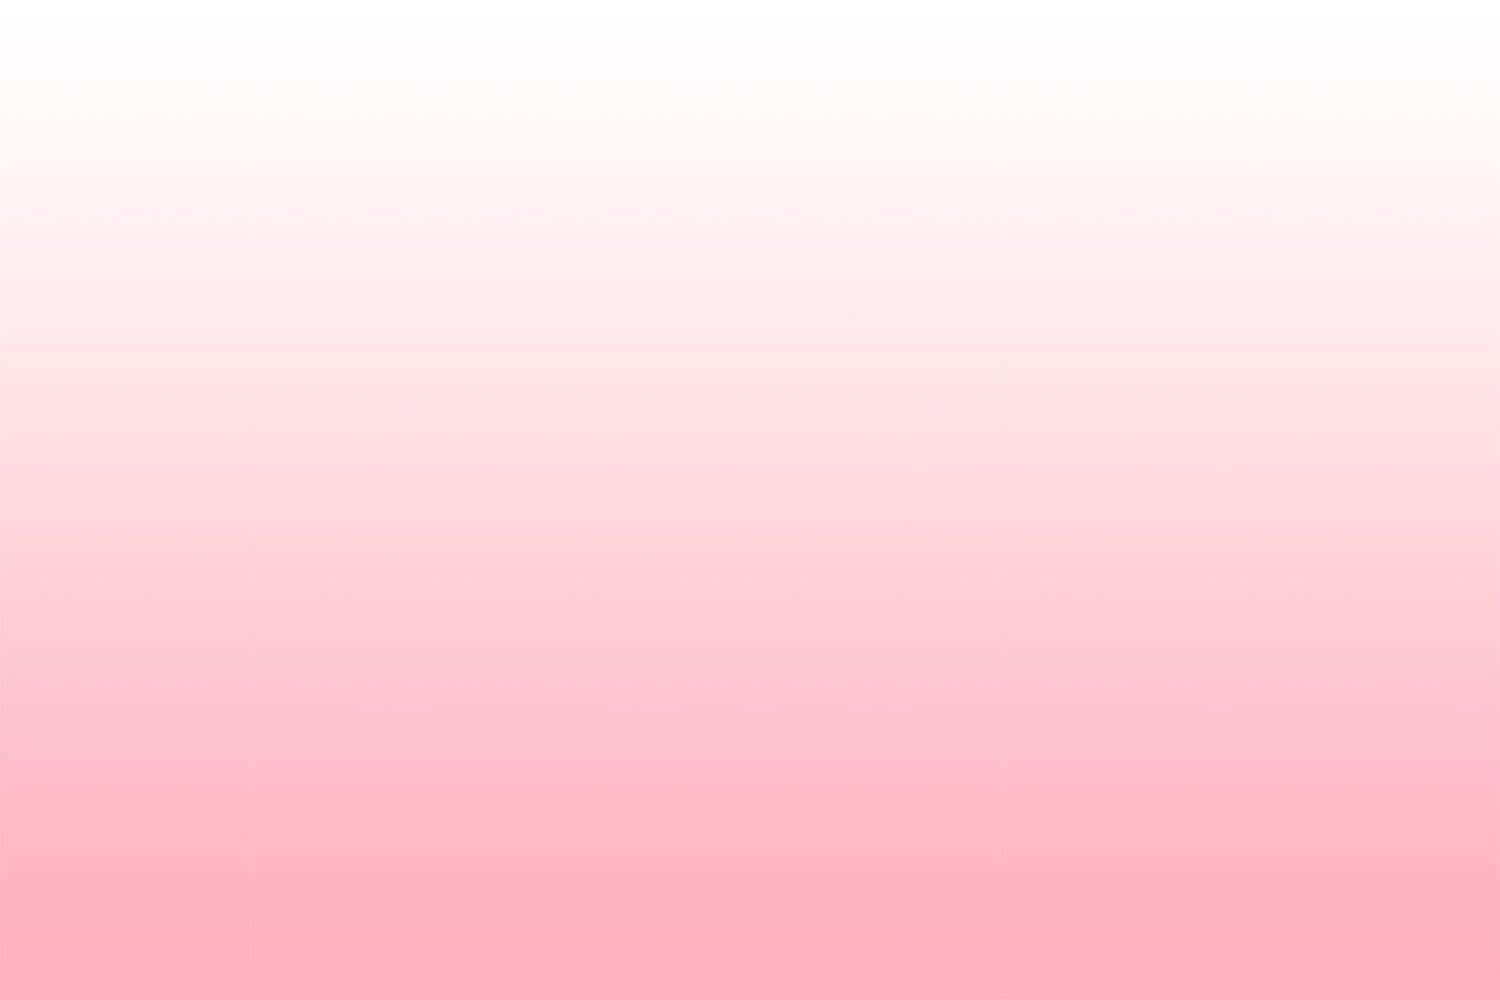 Pink Ombre Images  Free Download on Freepik